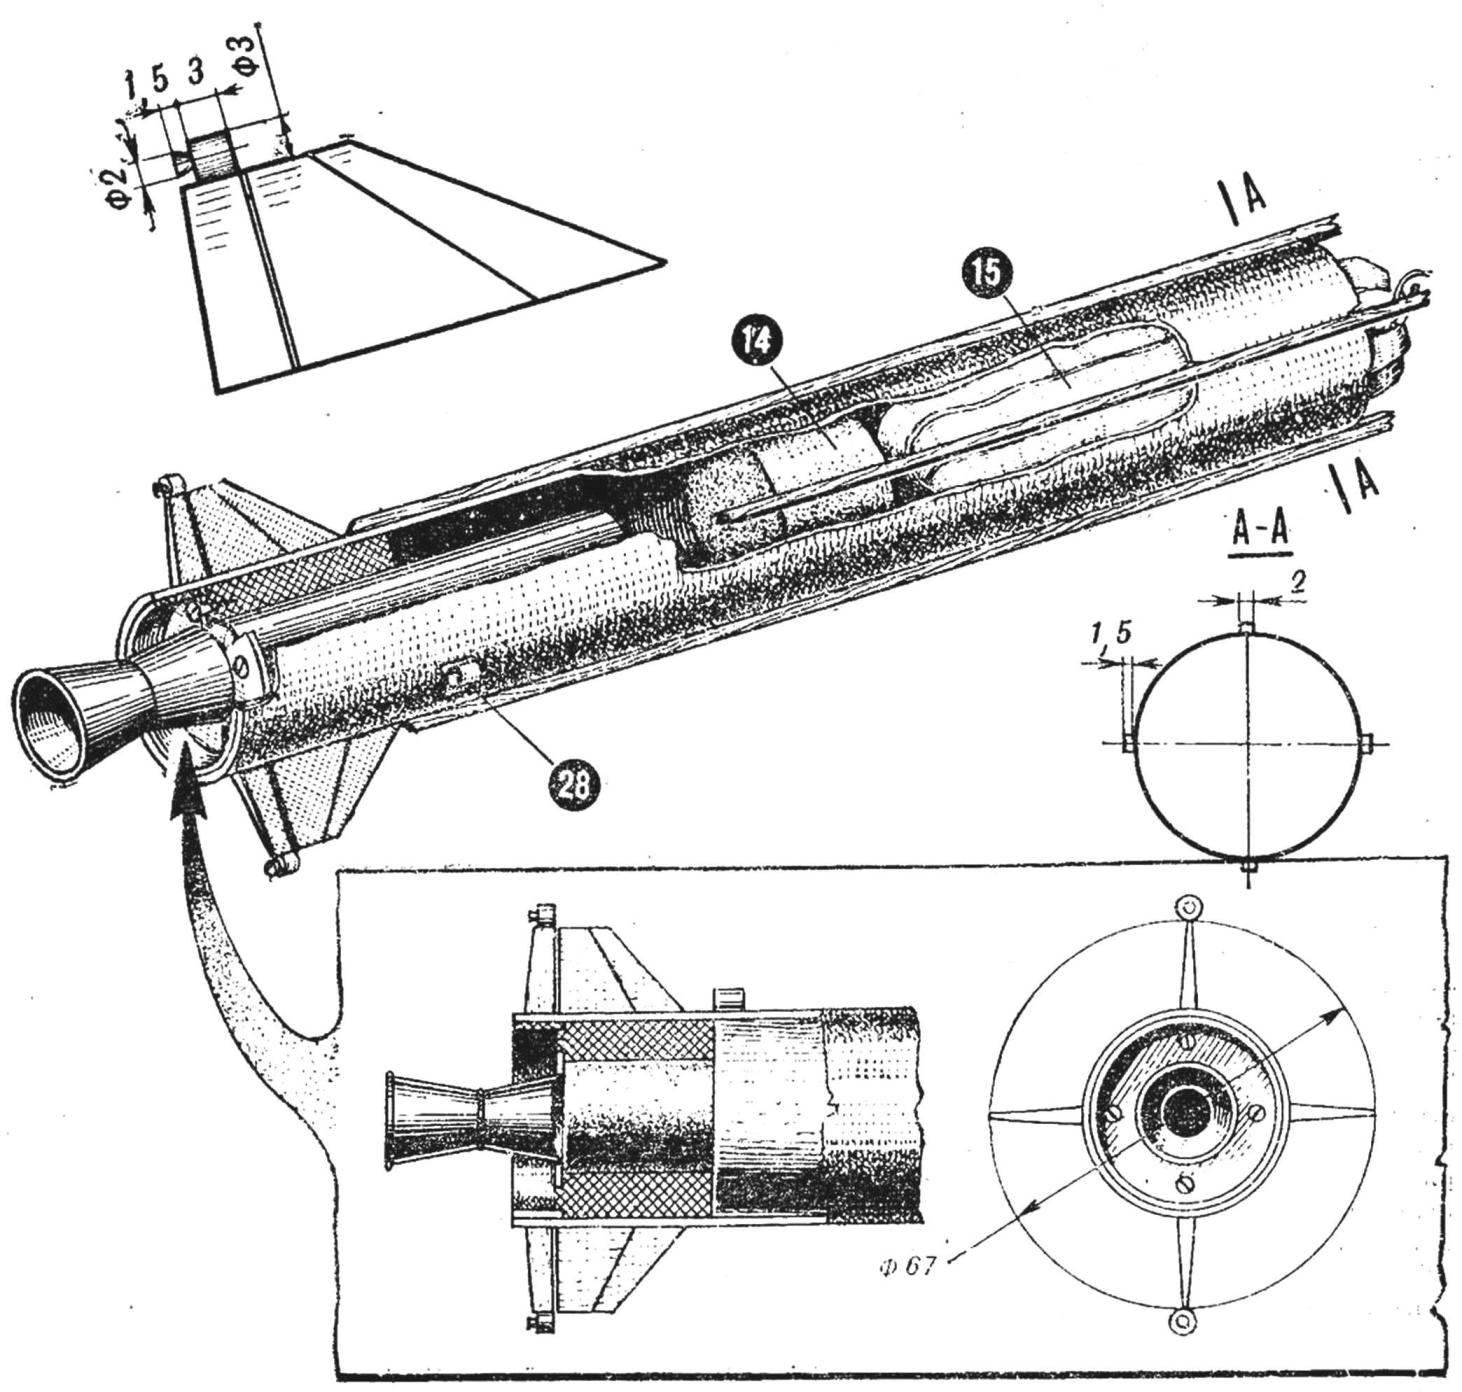 Fig. 1. The appearance and design of the rocket 